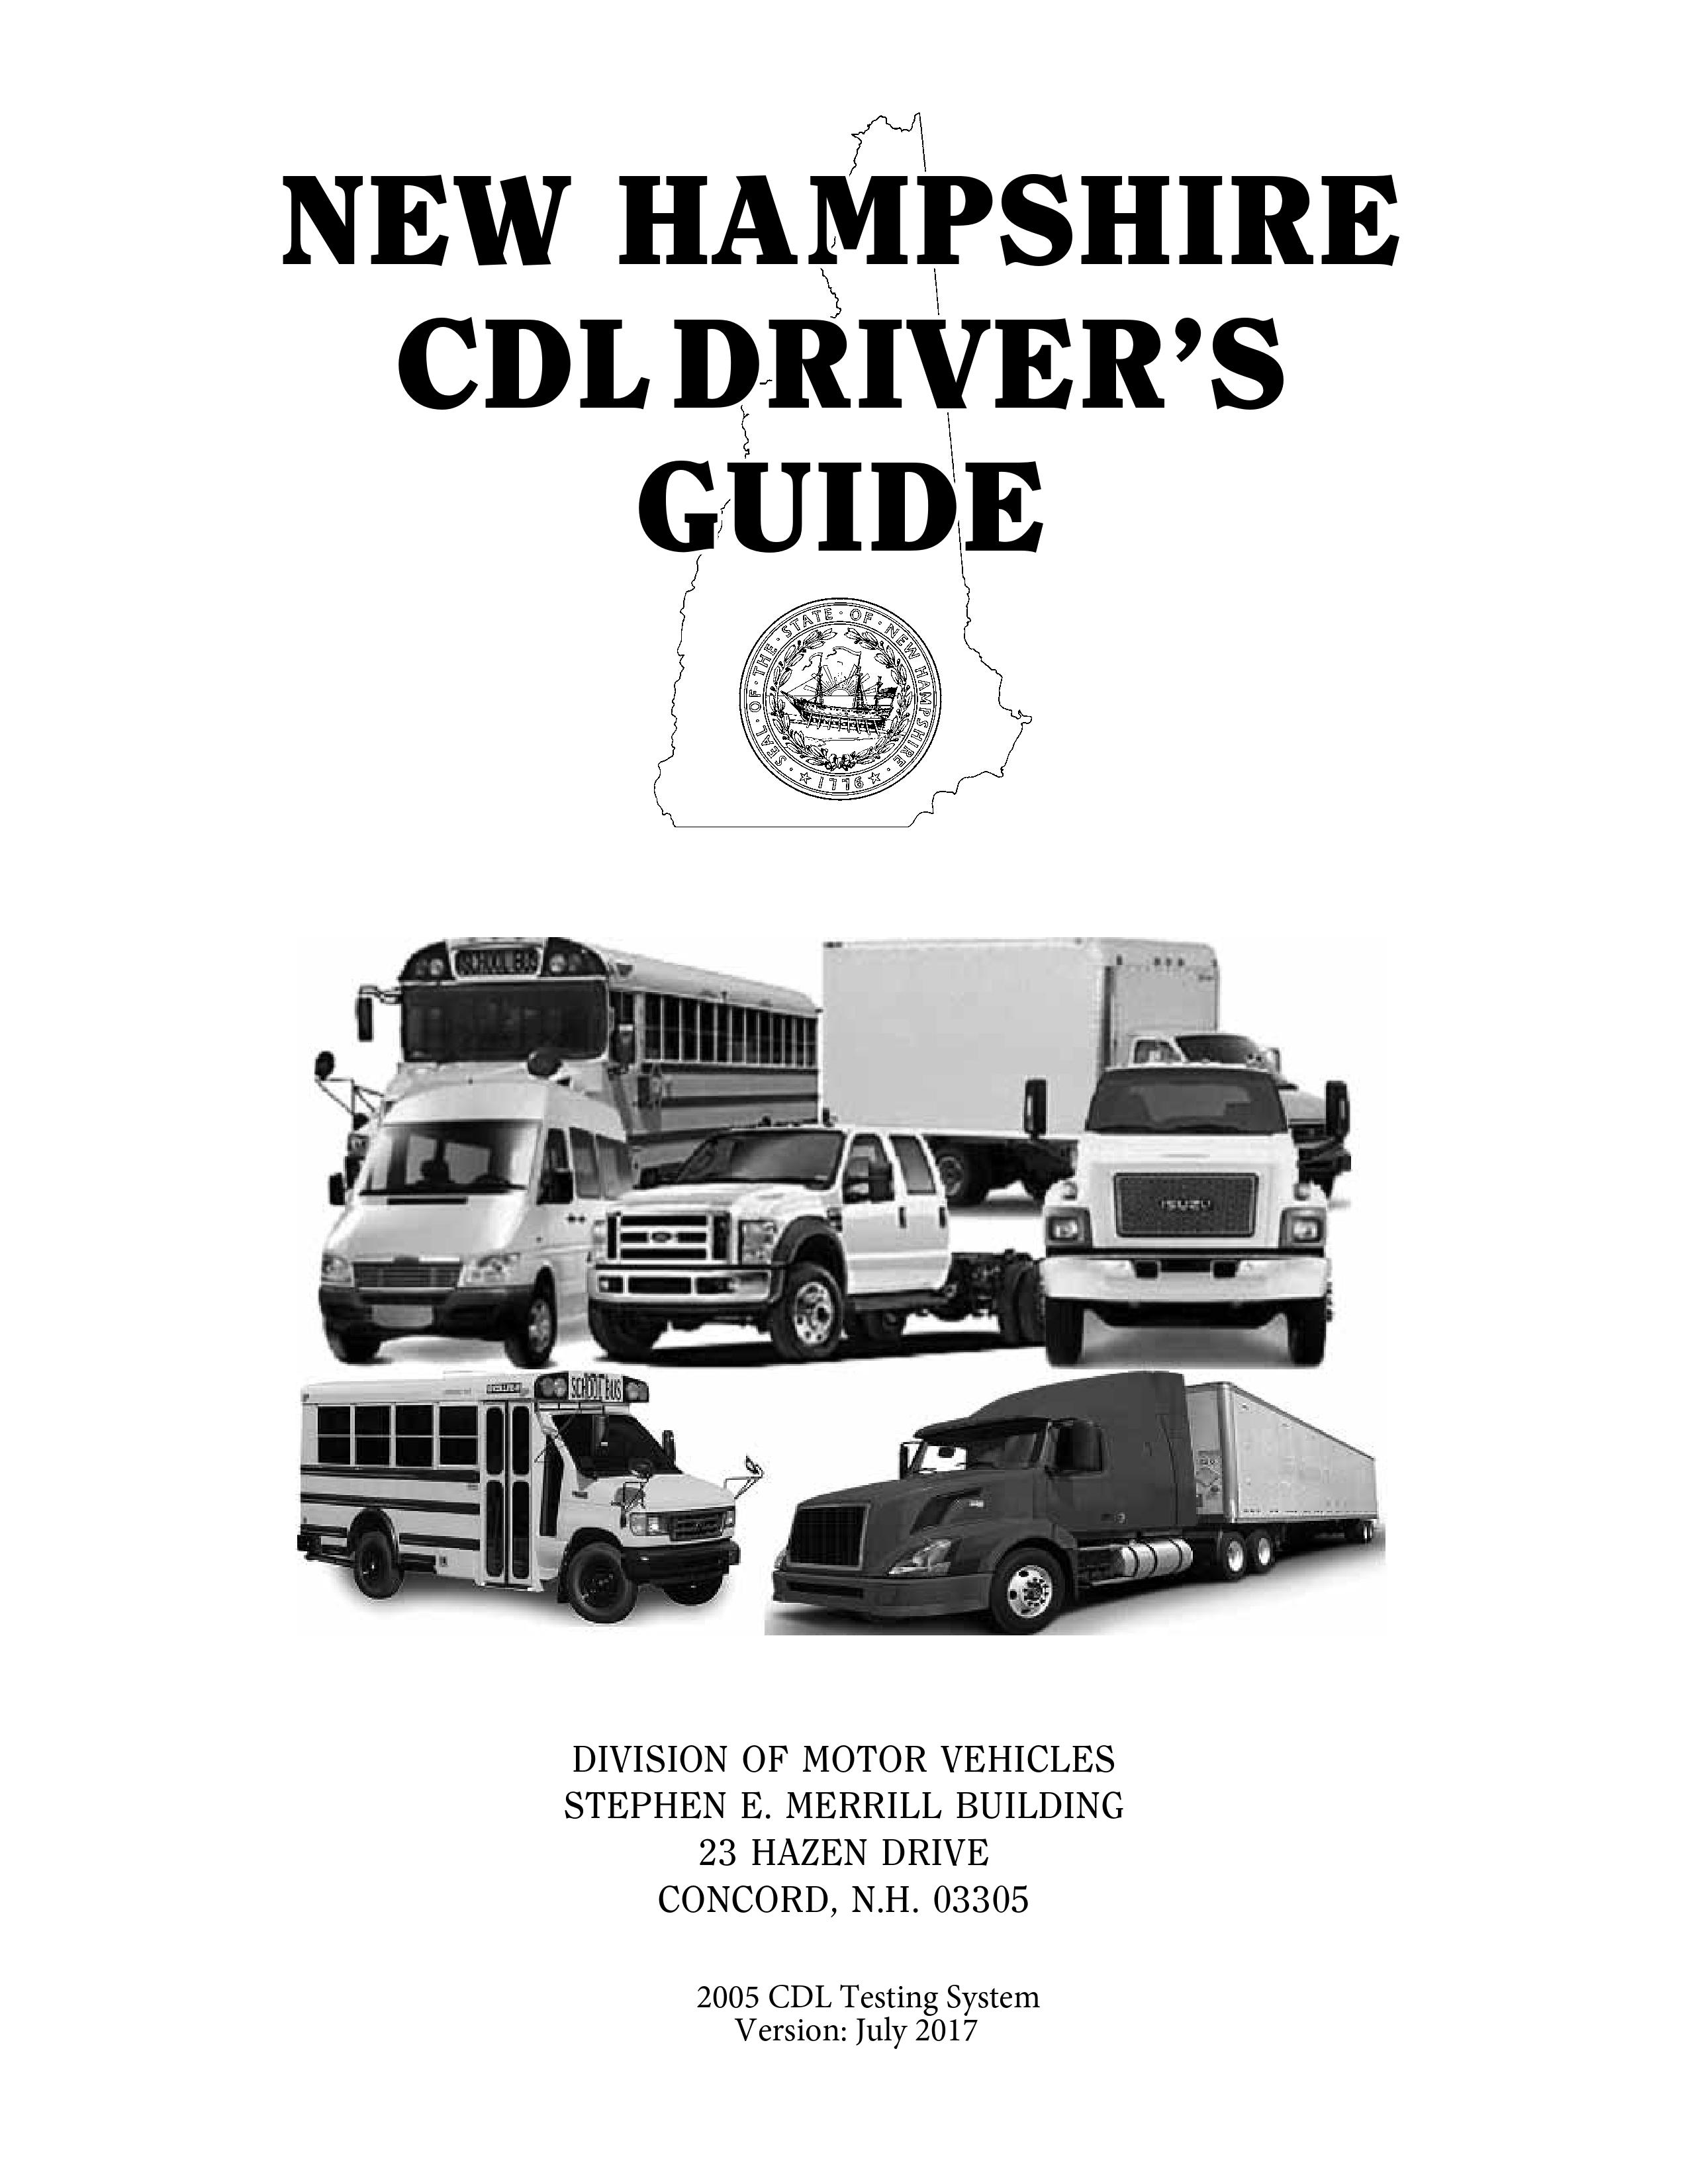 New Hampshire's CDL Manual